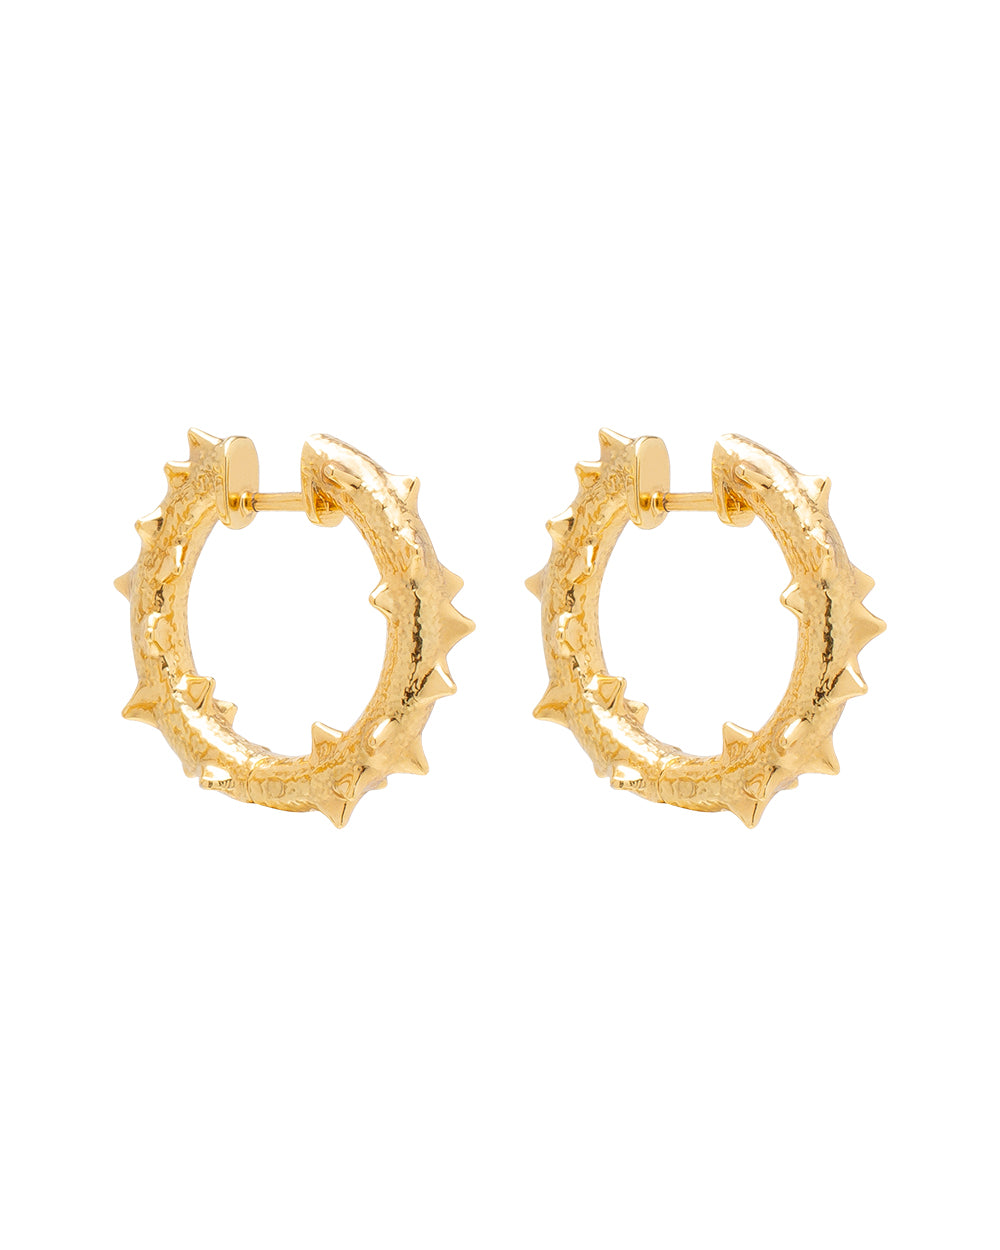 K15 Hoops chestnut earrings made of brass plated with 24K gold / diameter 20 mm